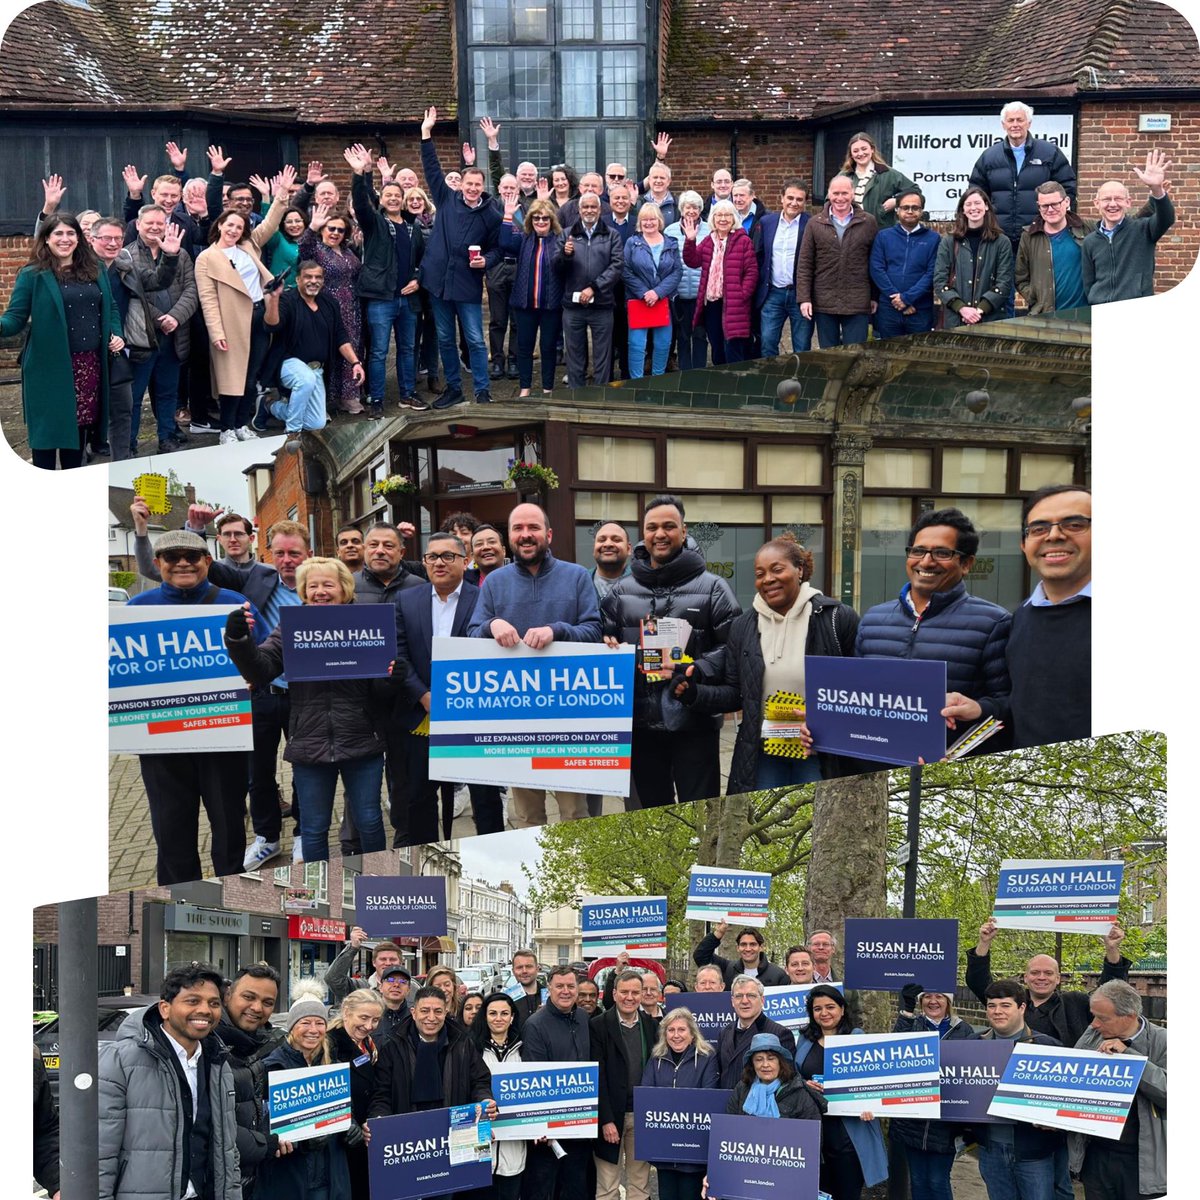 CBNI Team Members campaigned in different locations this weekend supporting Mayoral Candidate Susan Hall, with RT Jeremy Hunt at Surrey ⁦@TeamLondonUK⁩ ⁦@ChrisVinante⁩ ⁦@Conservatives⁩ ⁦@yeshwanthsinghv⁩